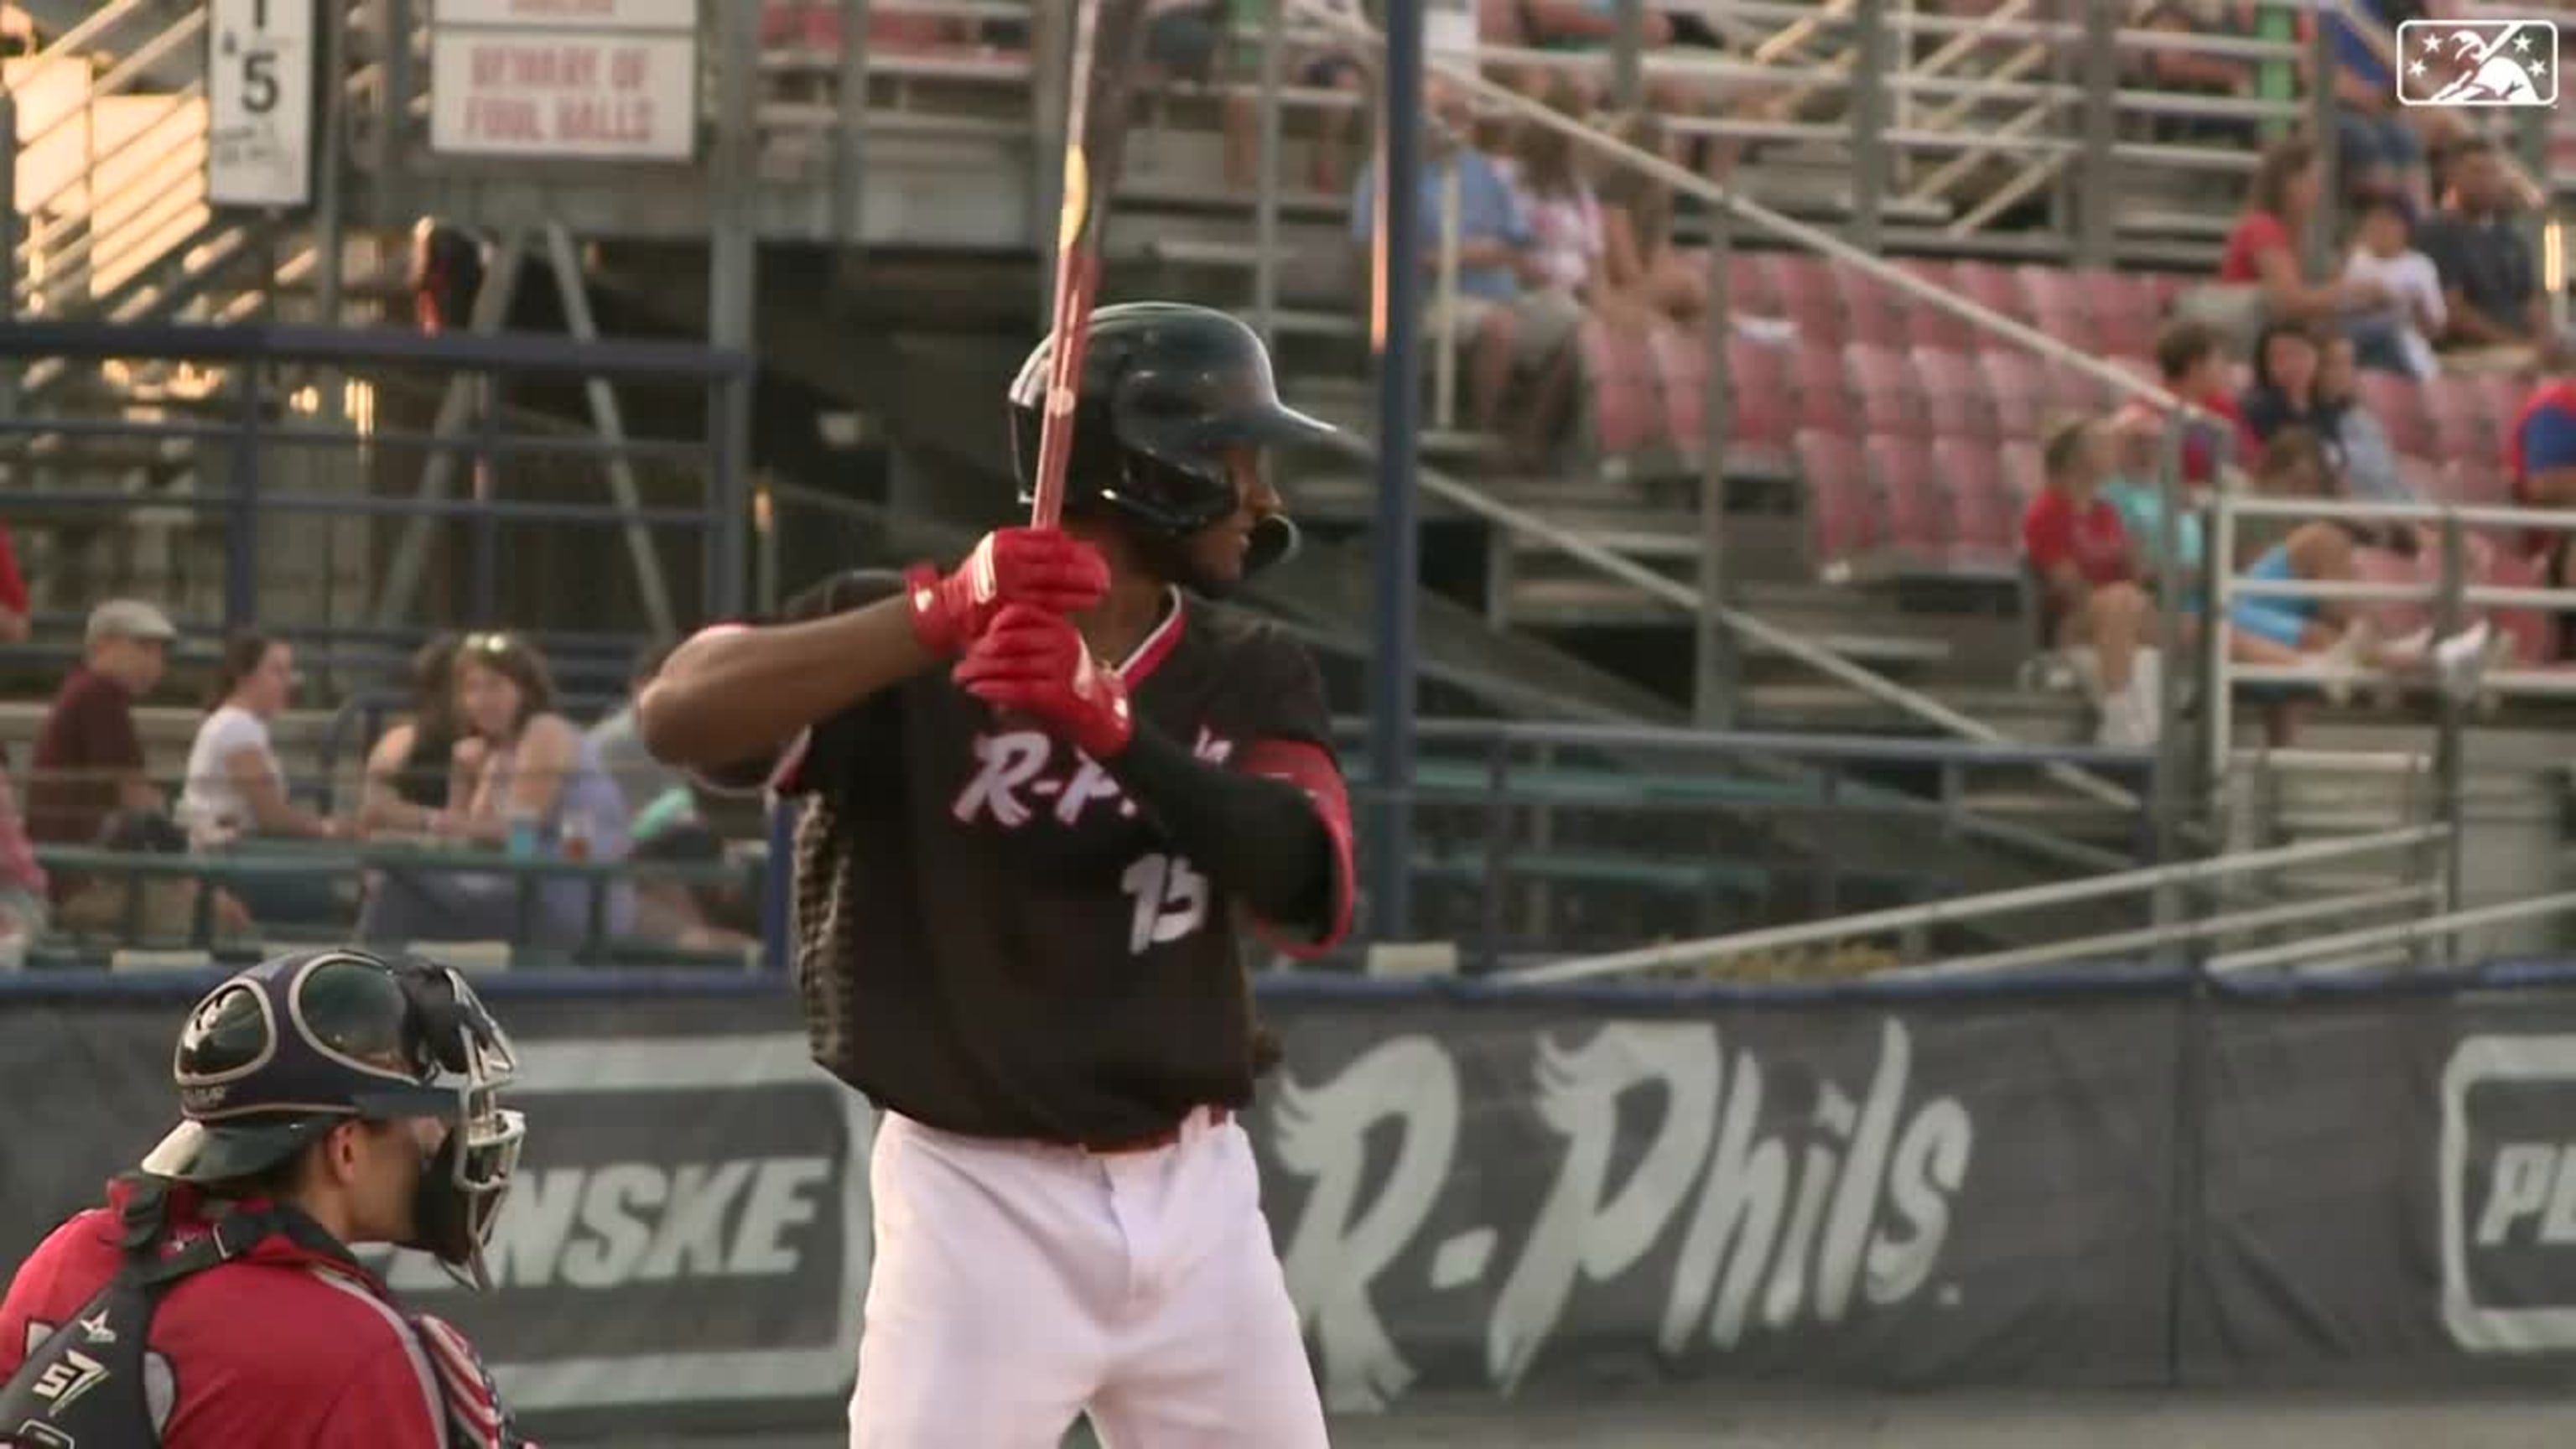 After 610 days, the Louisville Bats are back